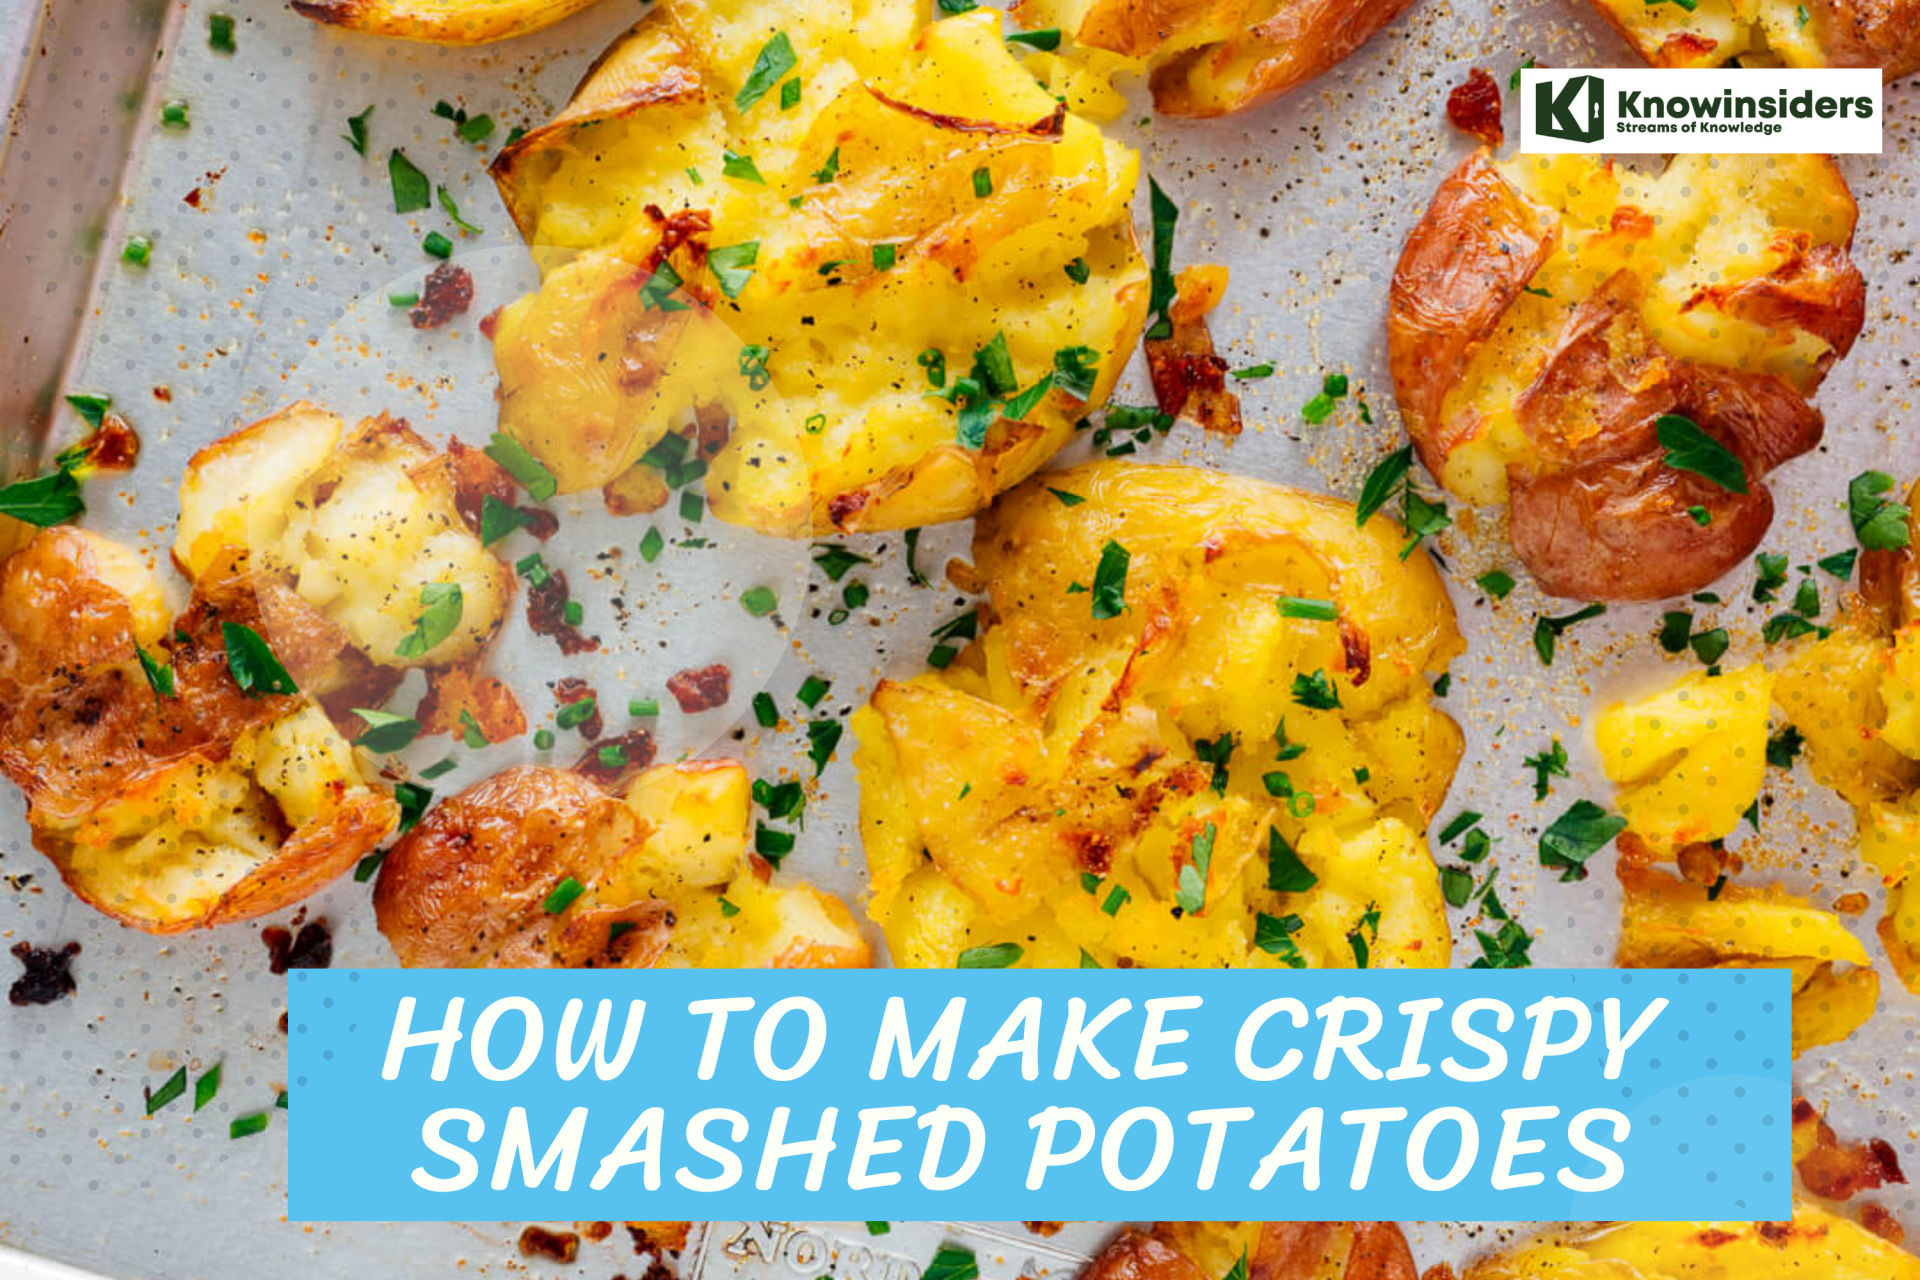 How to Make Smashed Potatoes In New Style